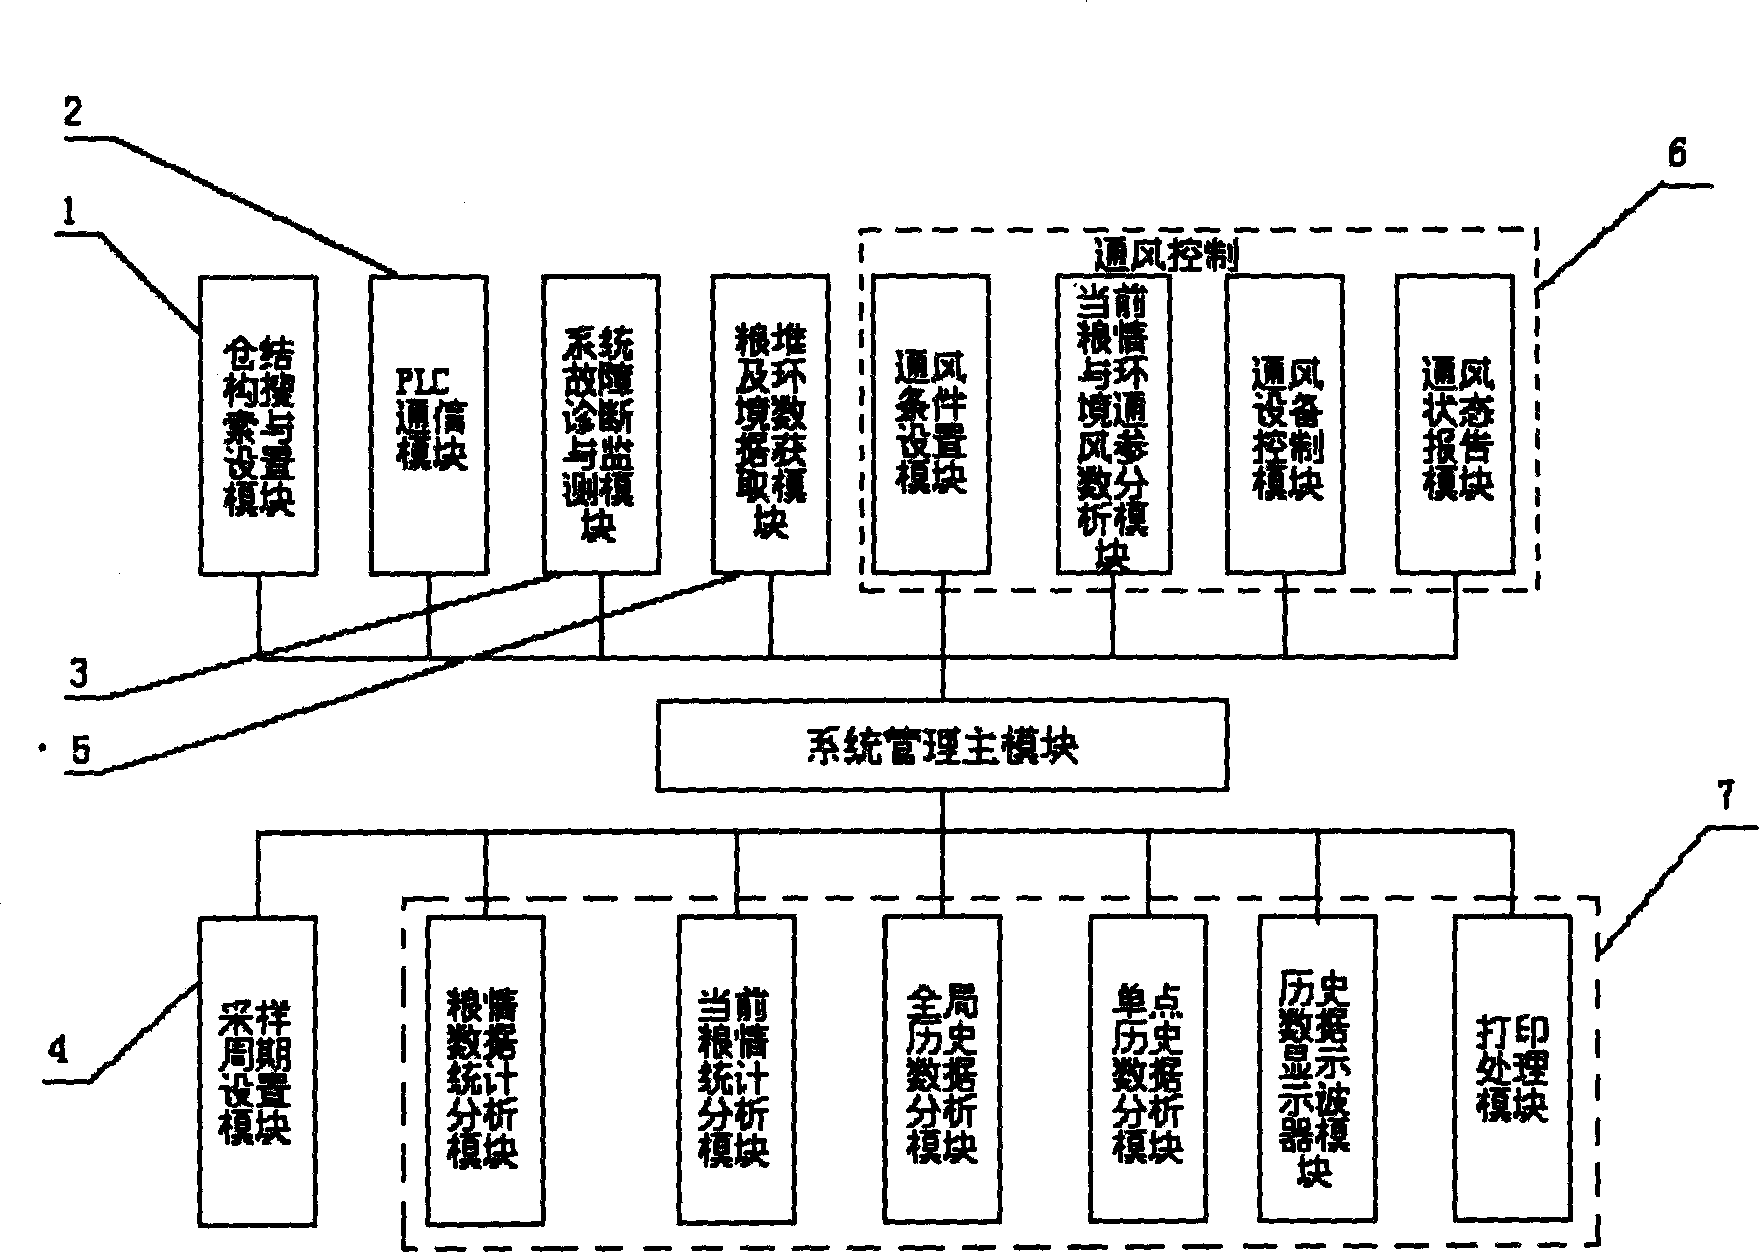 Intelligent management control system and method for mechanical ventilation in grain storage